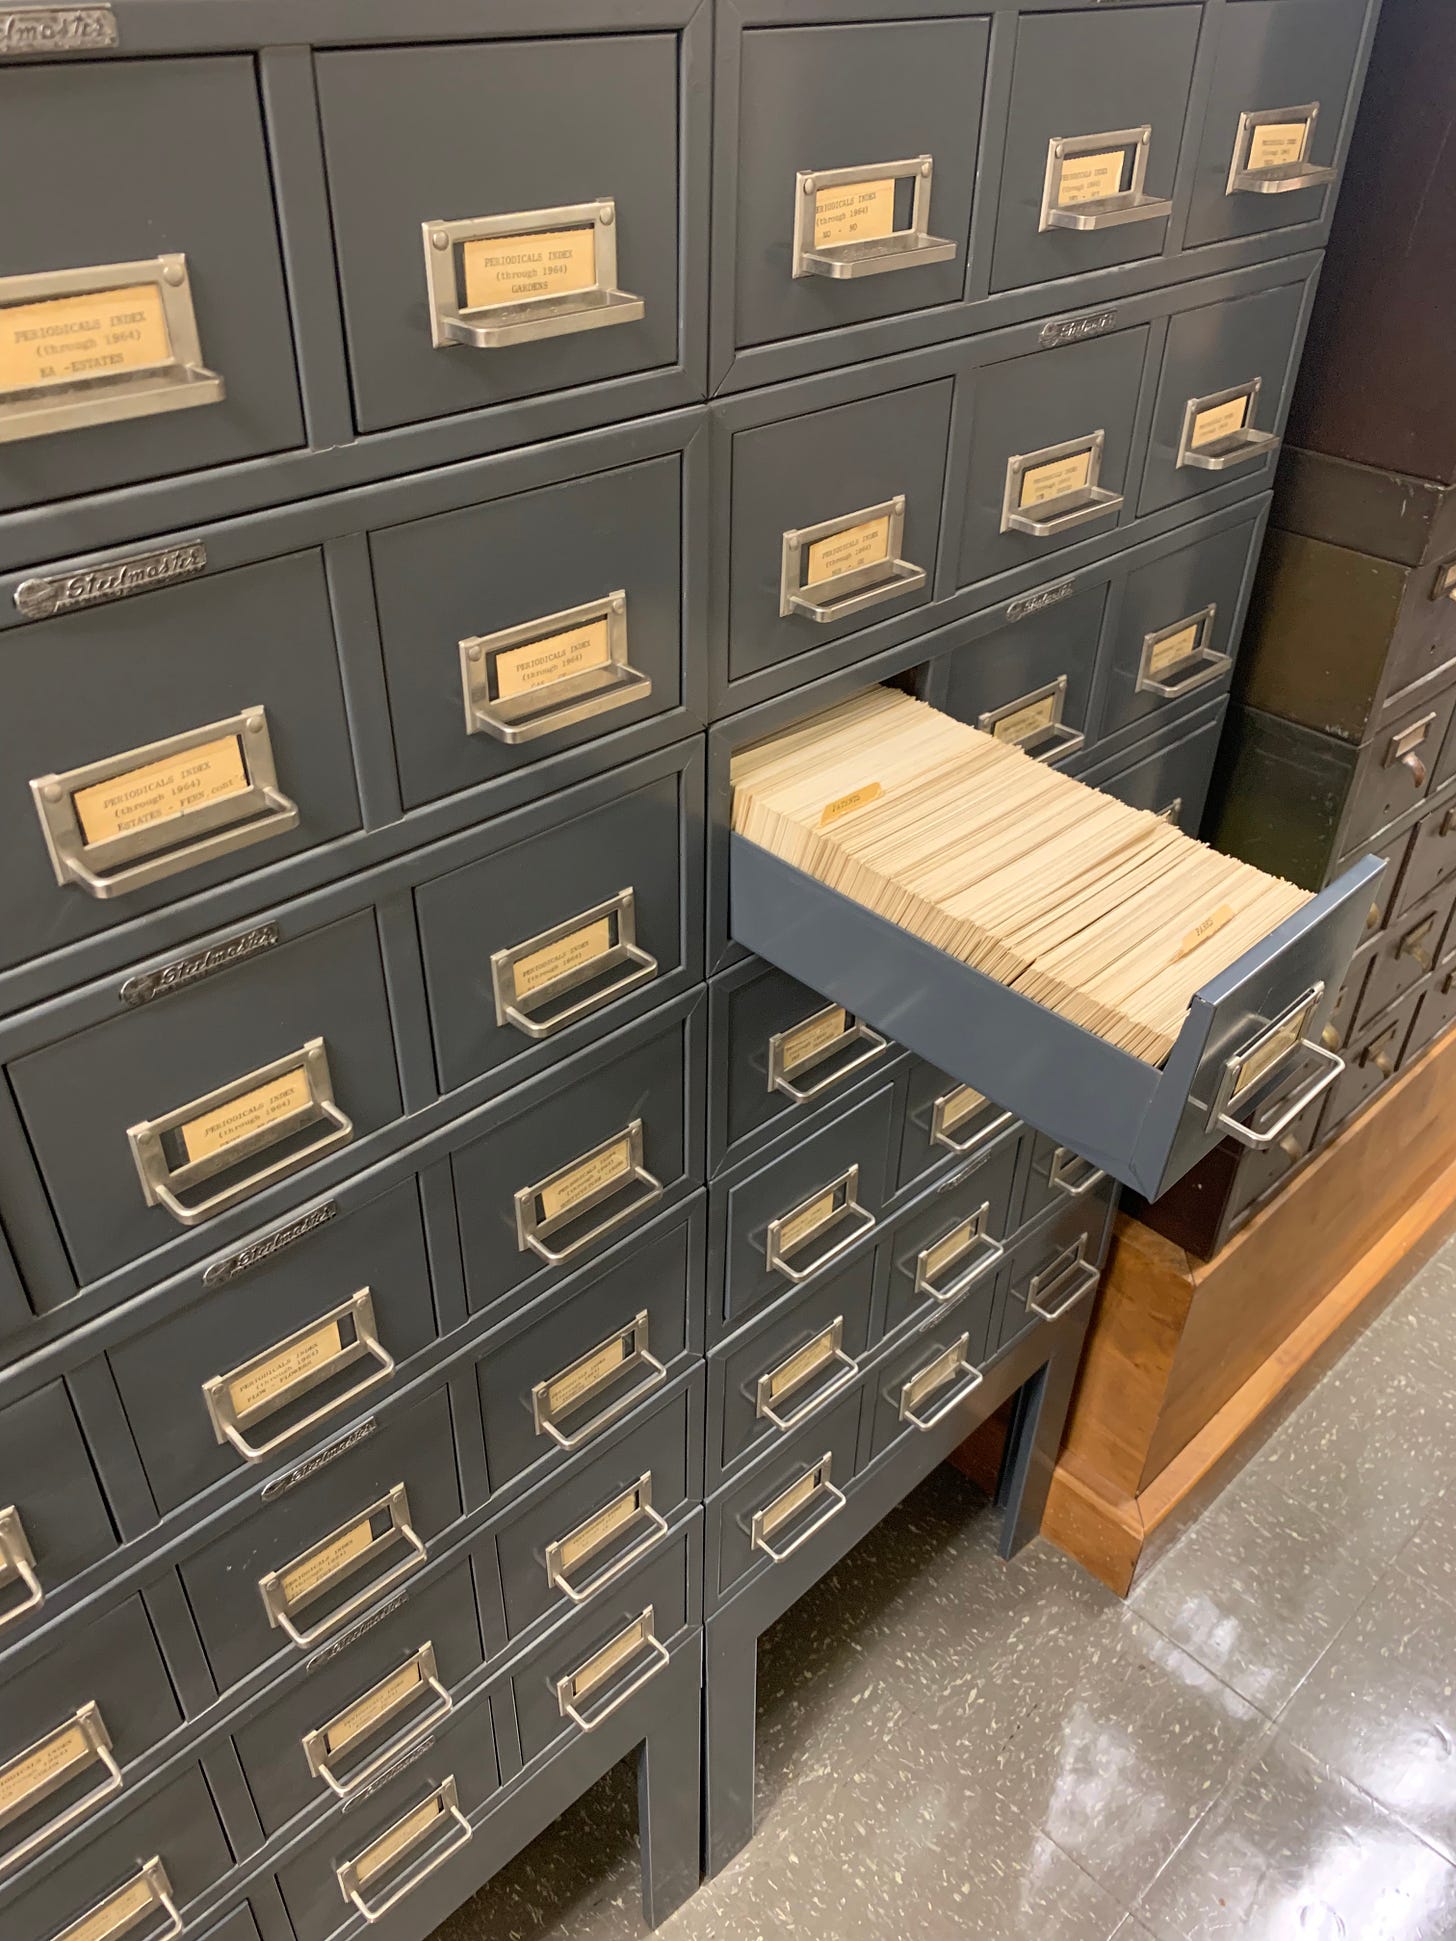 A gray metal cabinet with yellowed labels on the drawer fronts. One drawer is pulled open, and has numerous index cards inside.